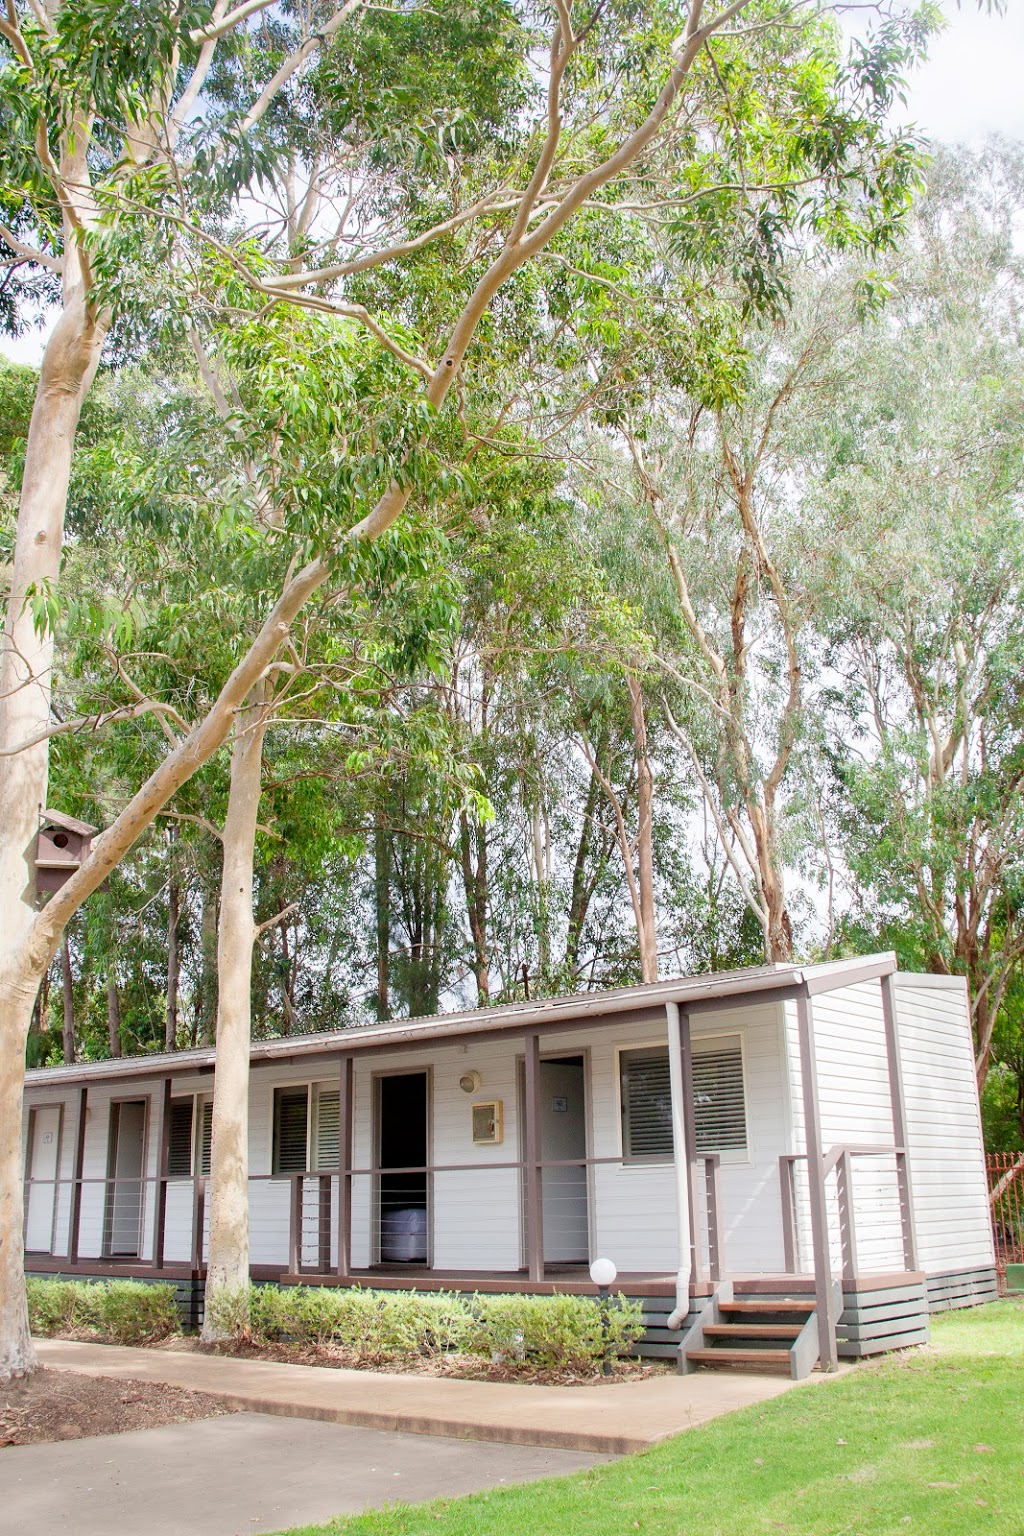 Nepean Shores Lifestyle Community | campground | 6-22 Tench Ave, Penrith NSW 2750, Australia | 0240584795 OR +61 2 4058 4795